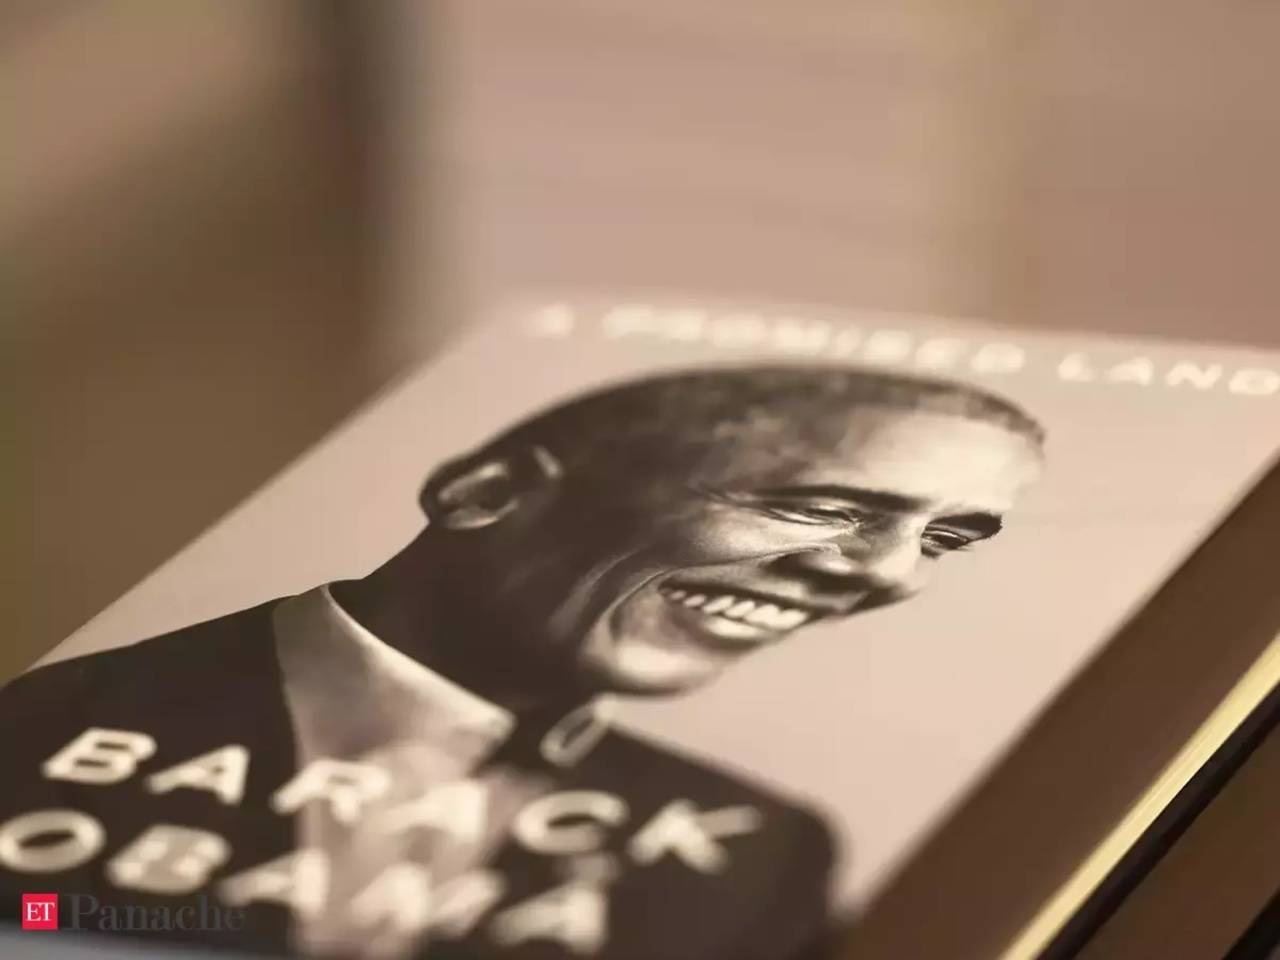 Obama's A Promised Land sells almost 890,000 copies on first day